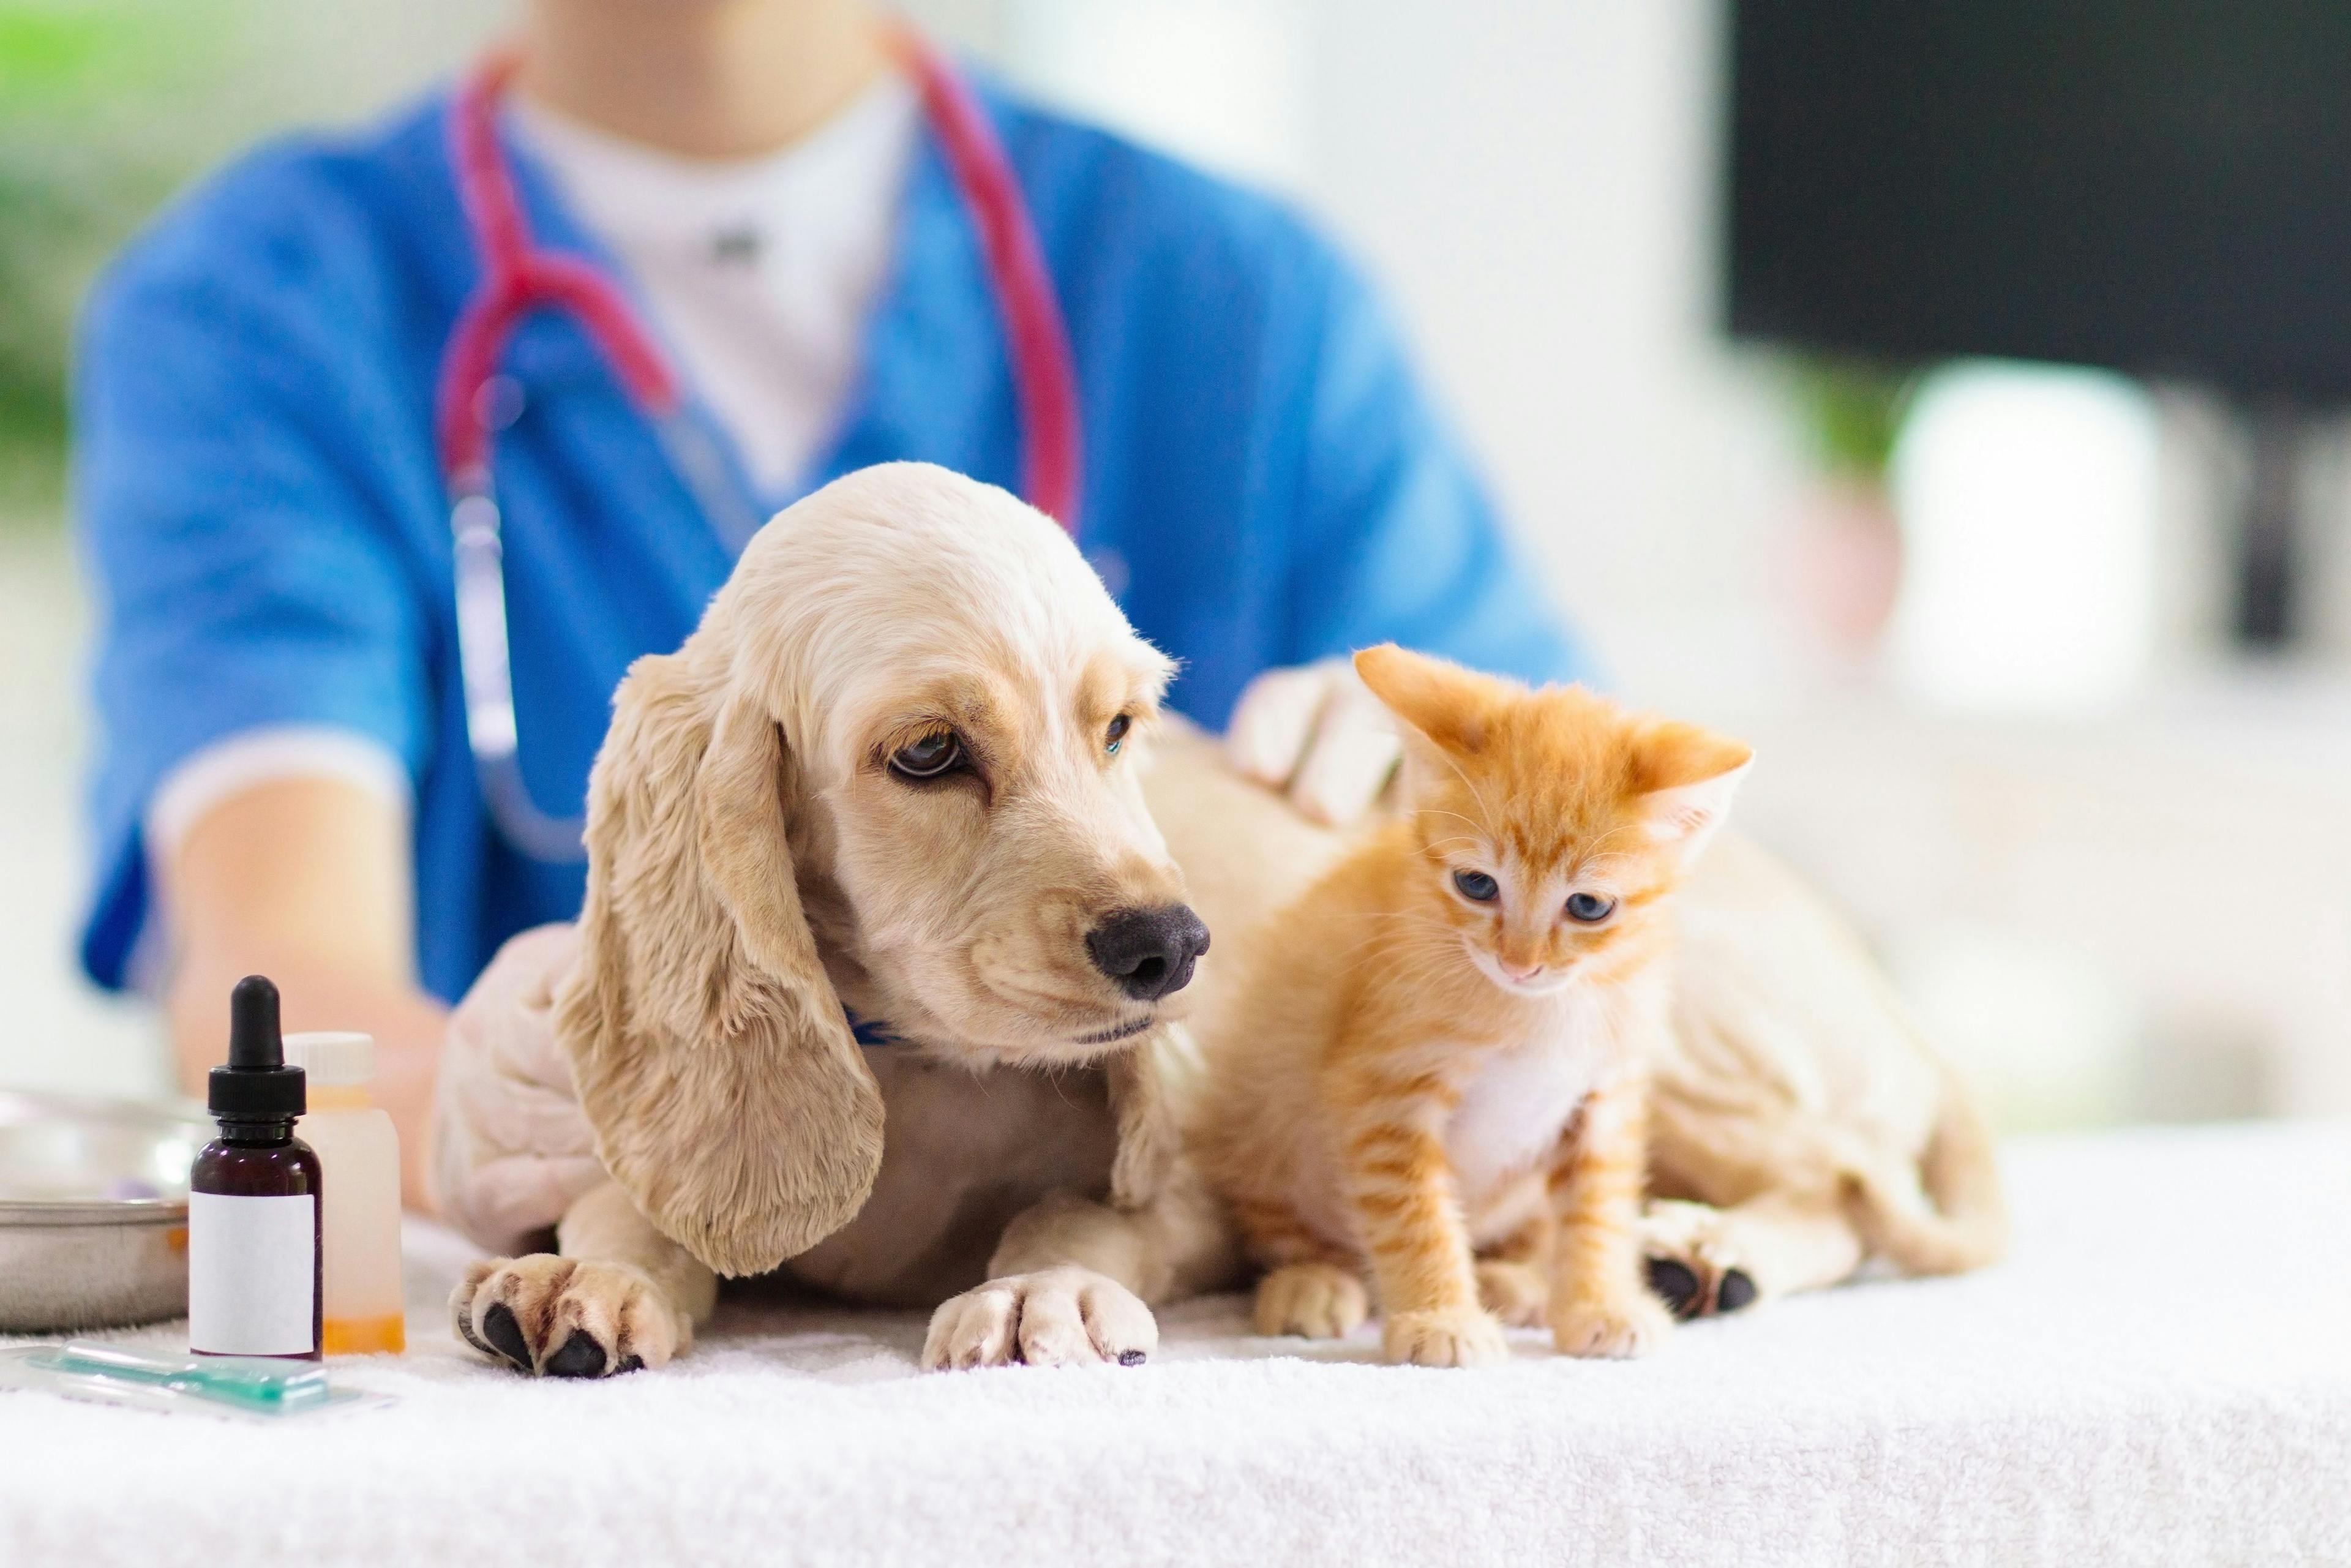 Basepaws opens recruitment for feline and canine chronic kidney disease research